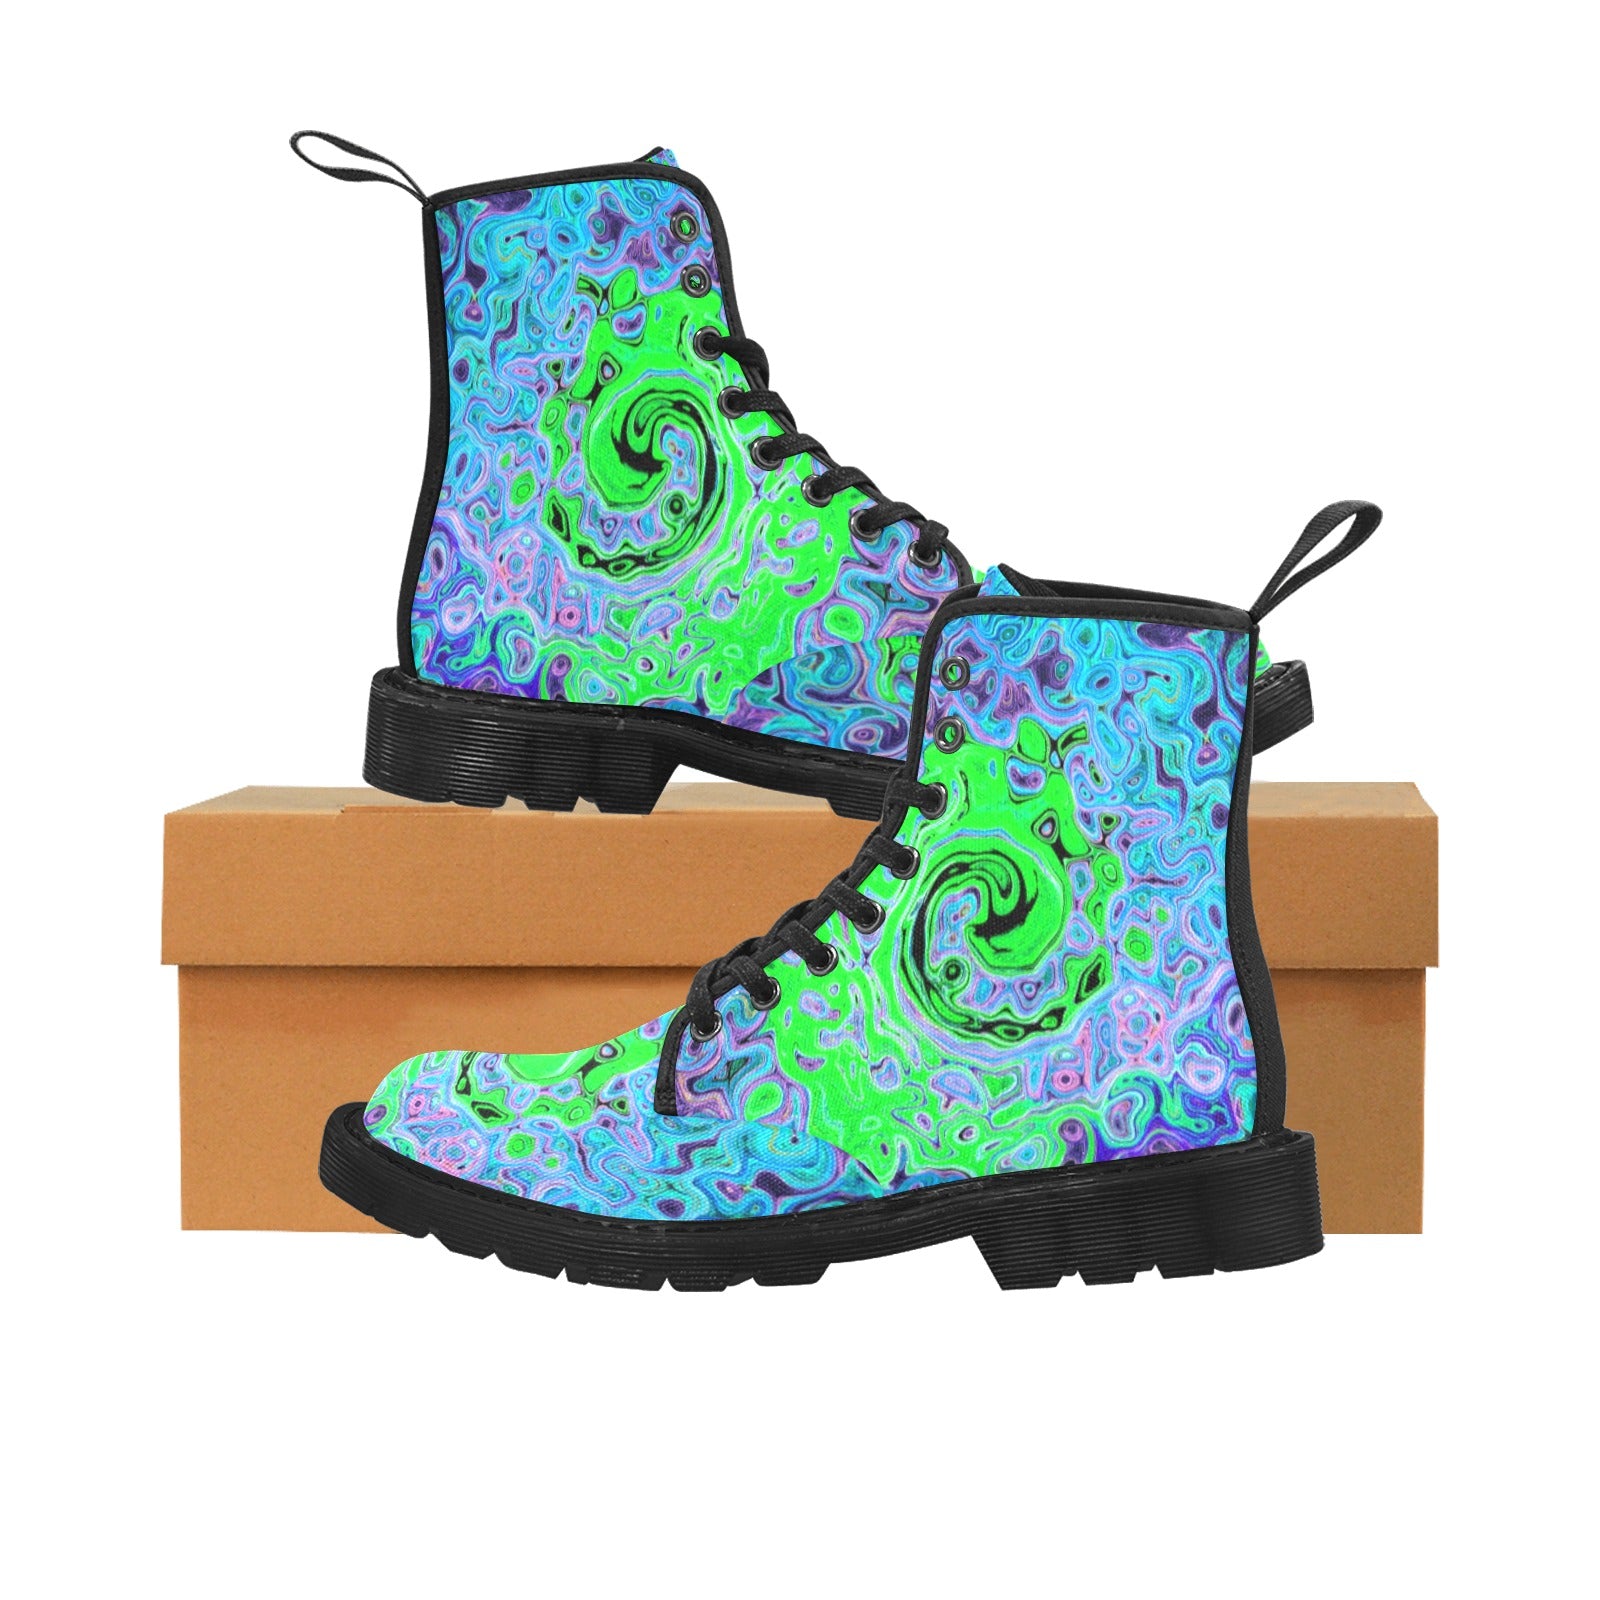 Boots for Women, Lime Green Groovy Abstract Retro Liquid Swirl - Black